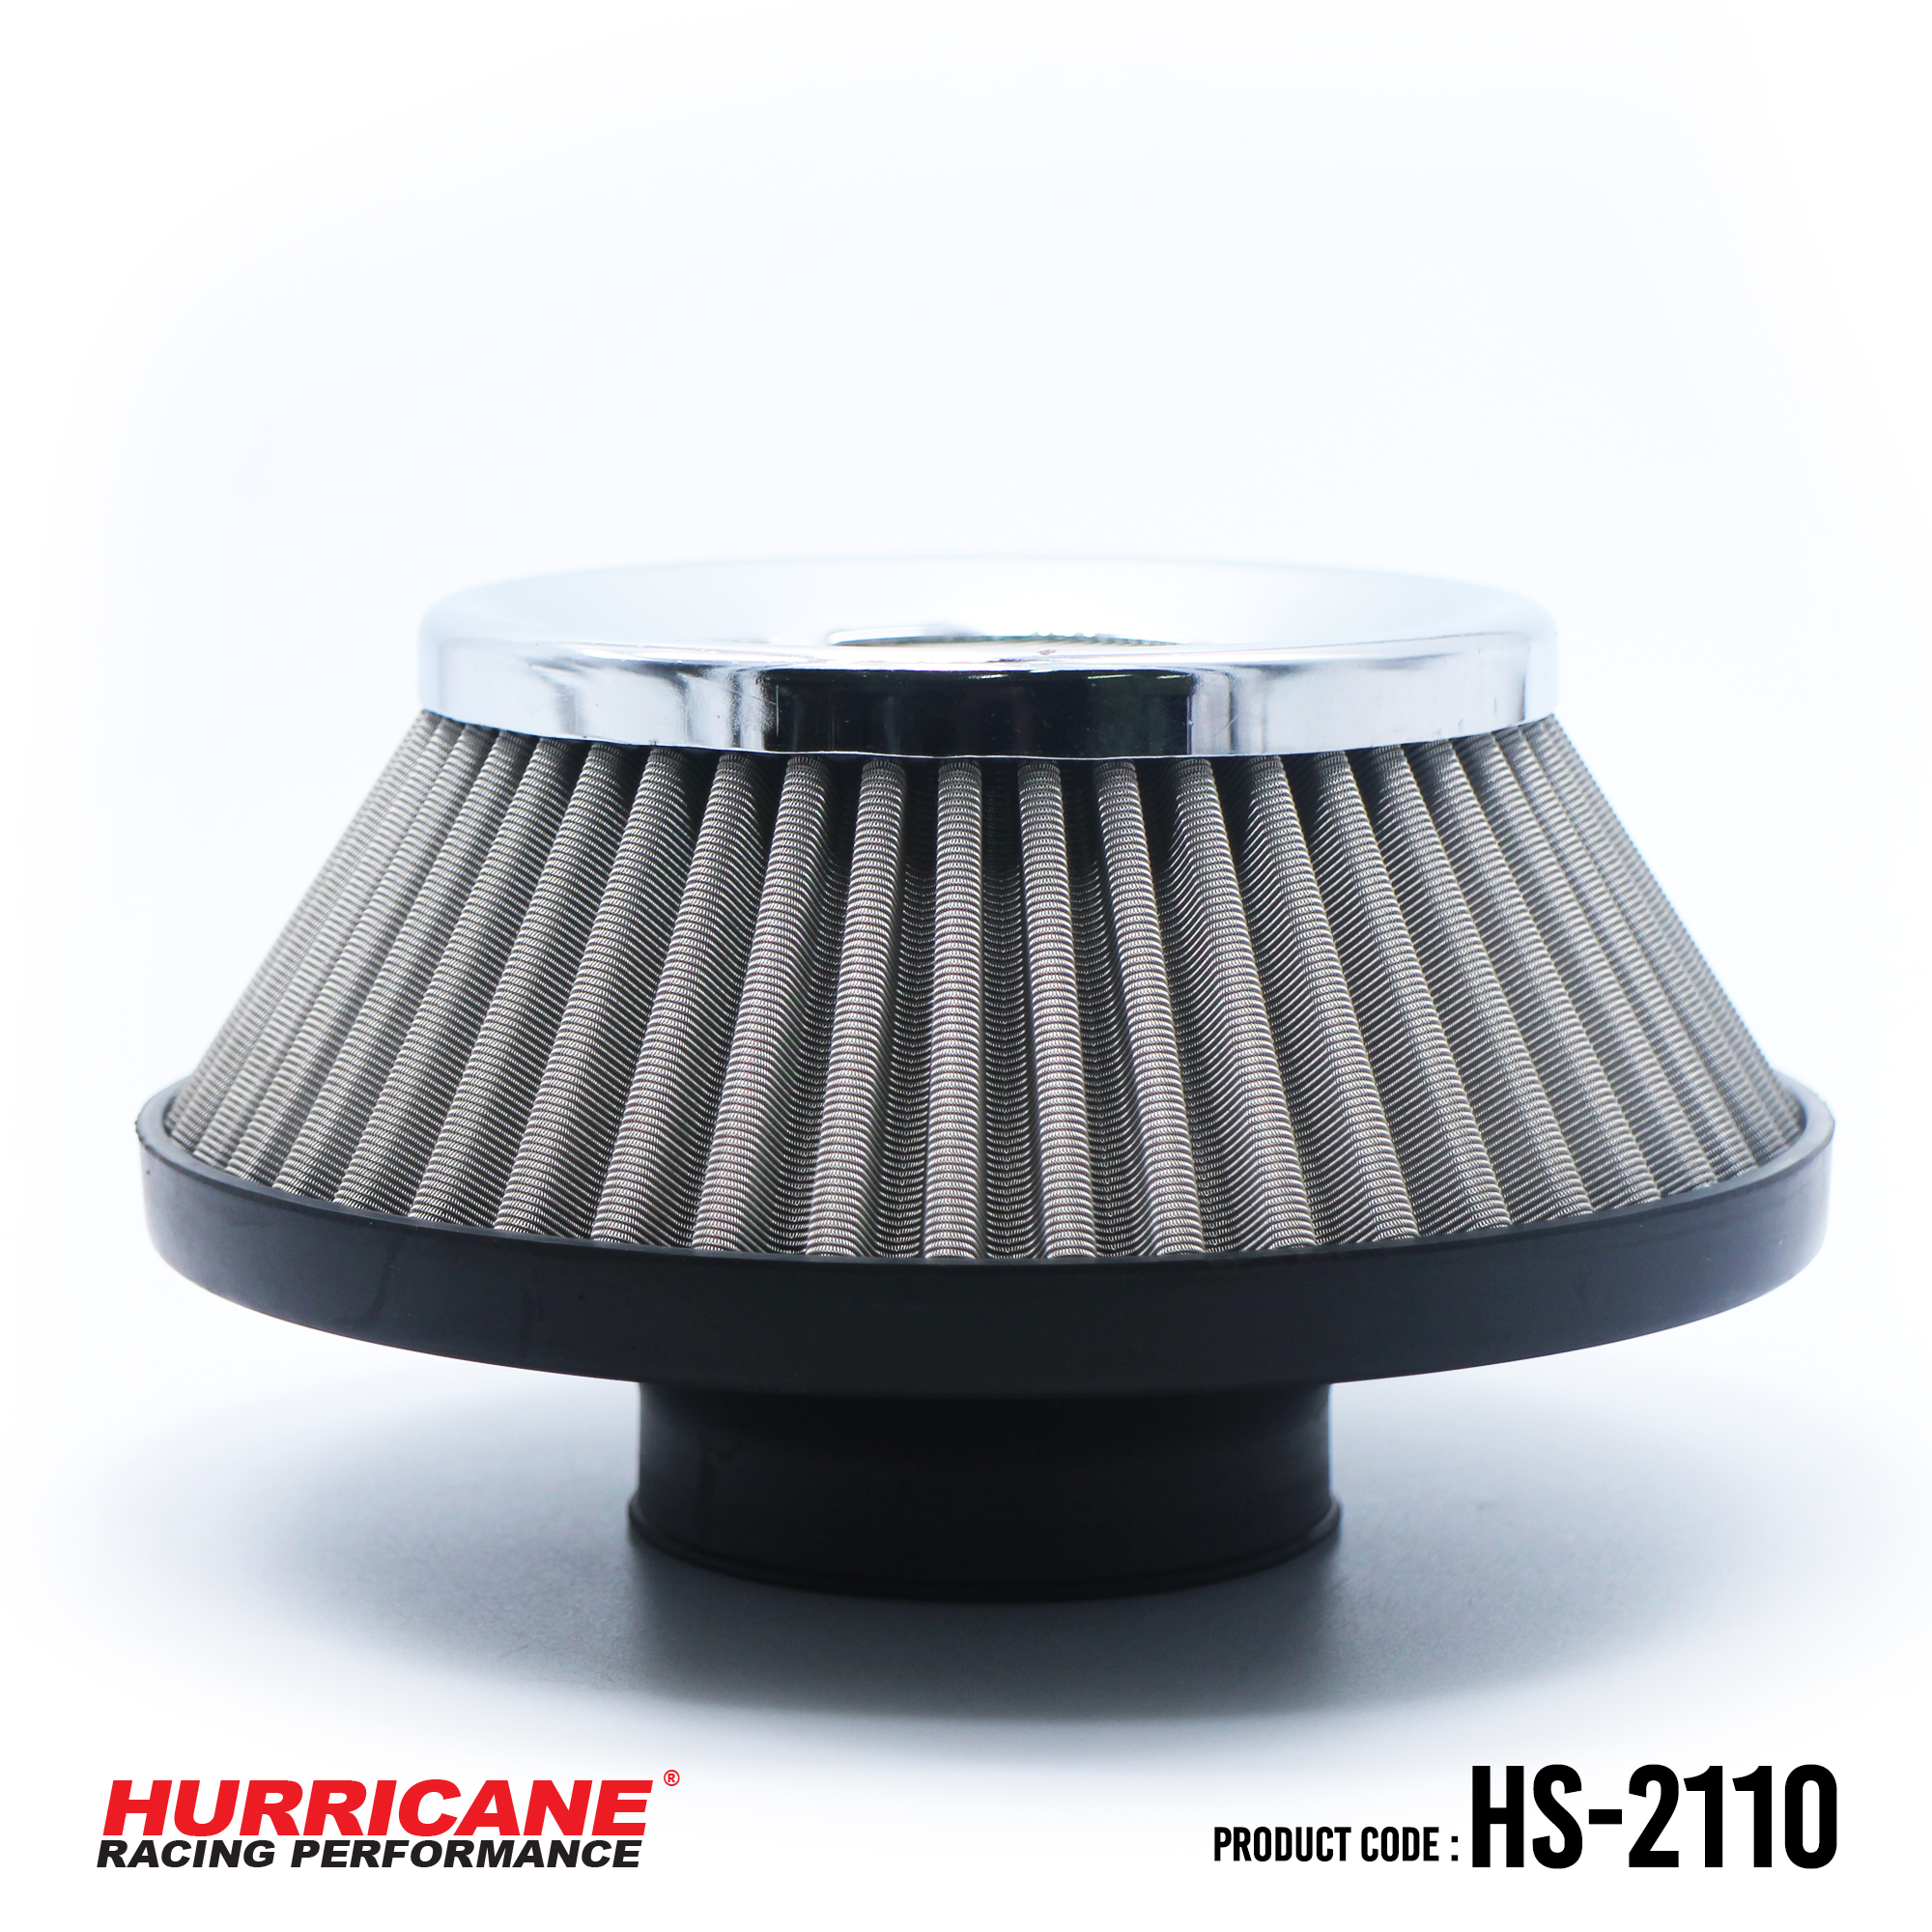 HURRICANE STAINLESS STEEL AIR FILTER FOR HS-2110 กรองเปลือย